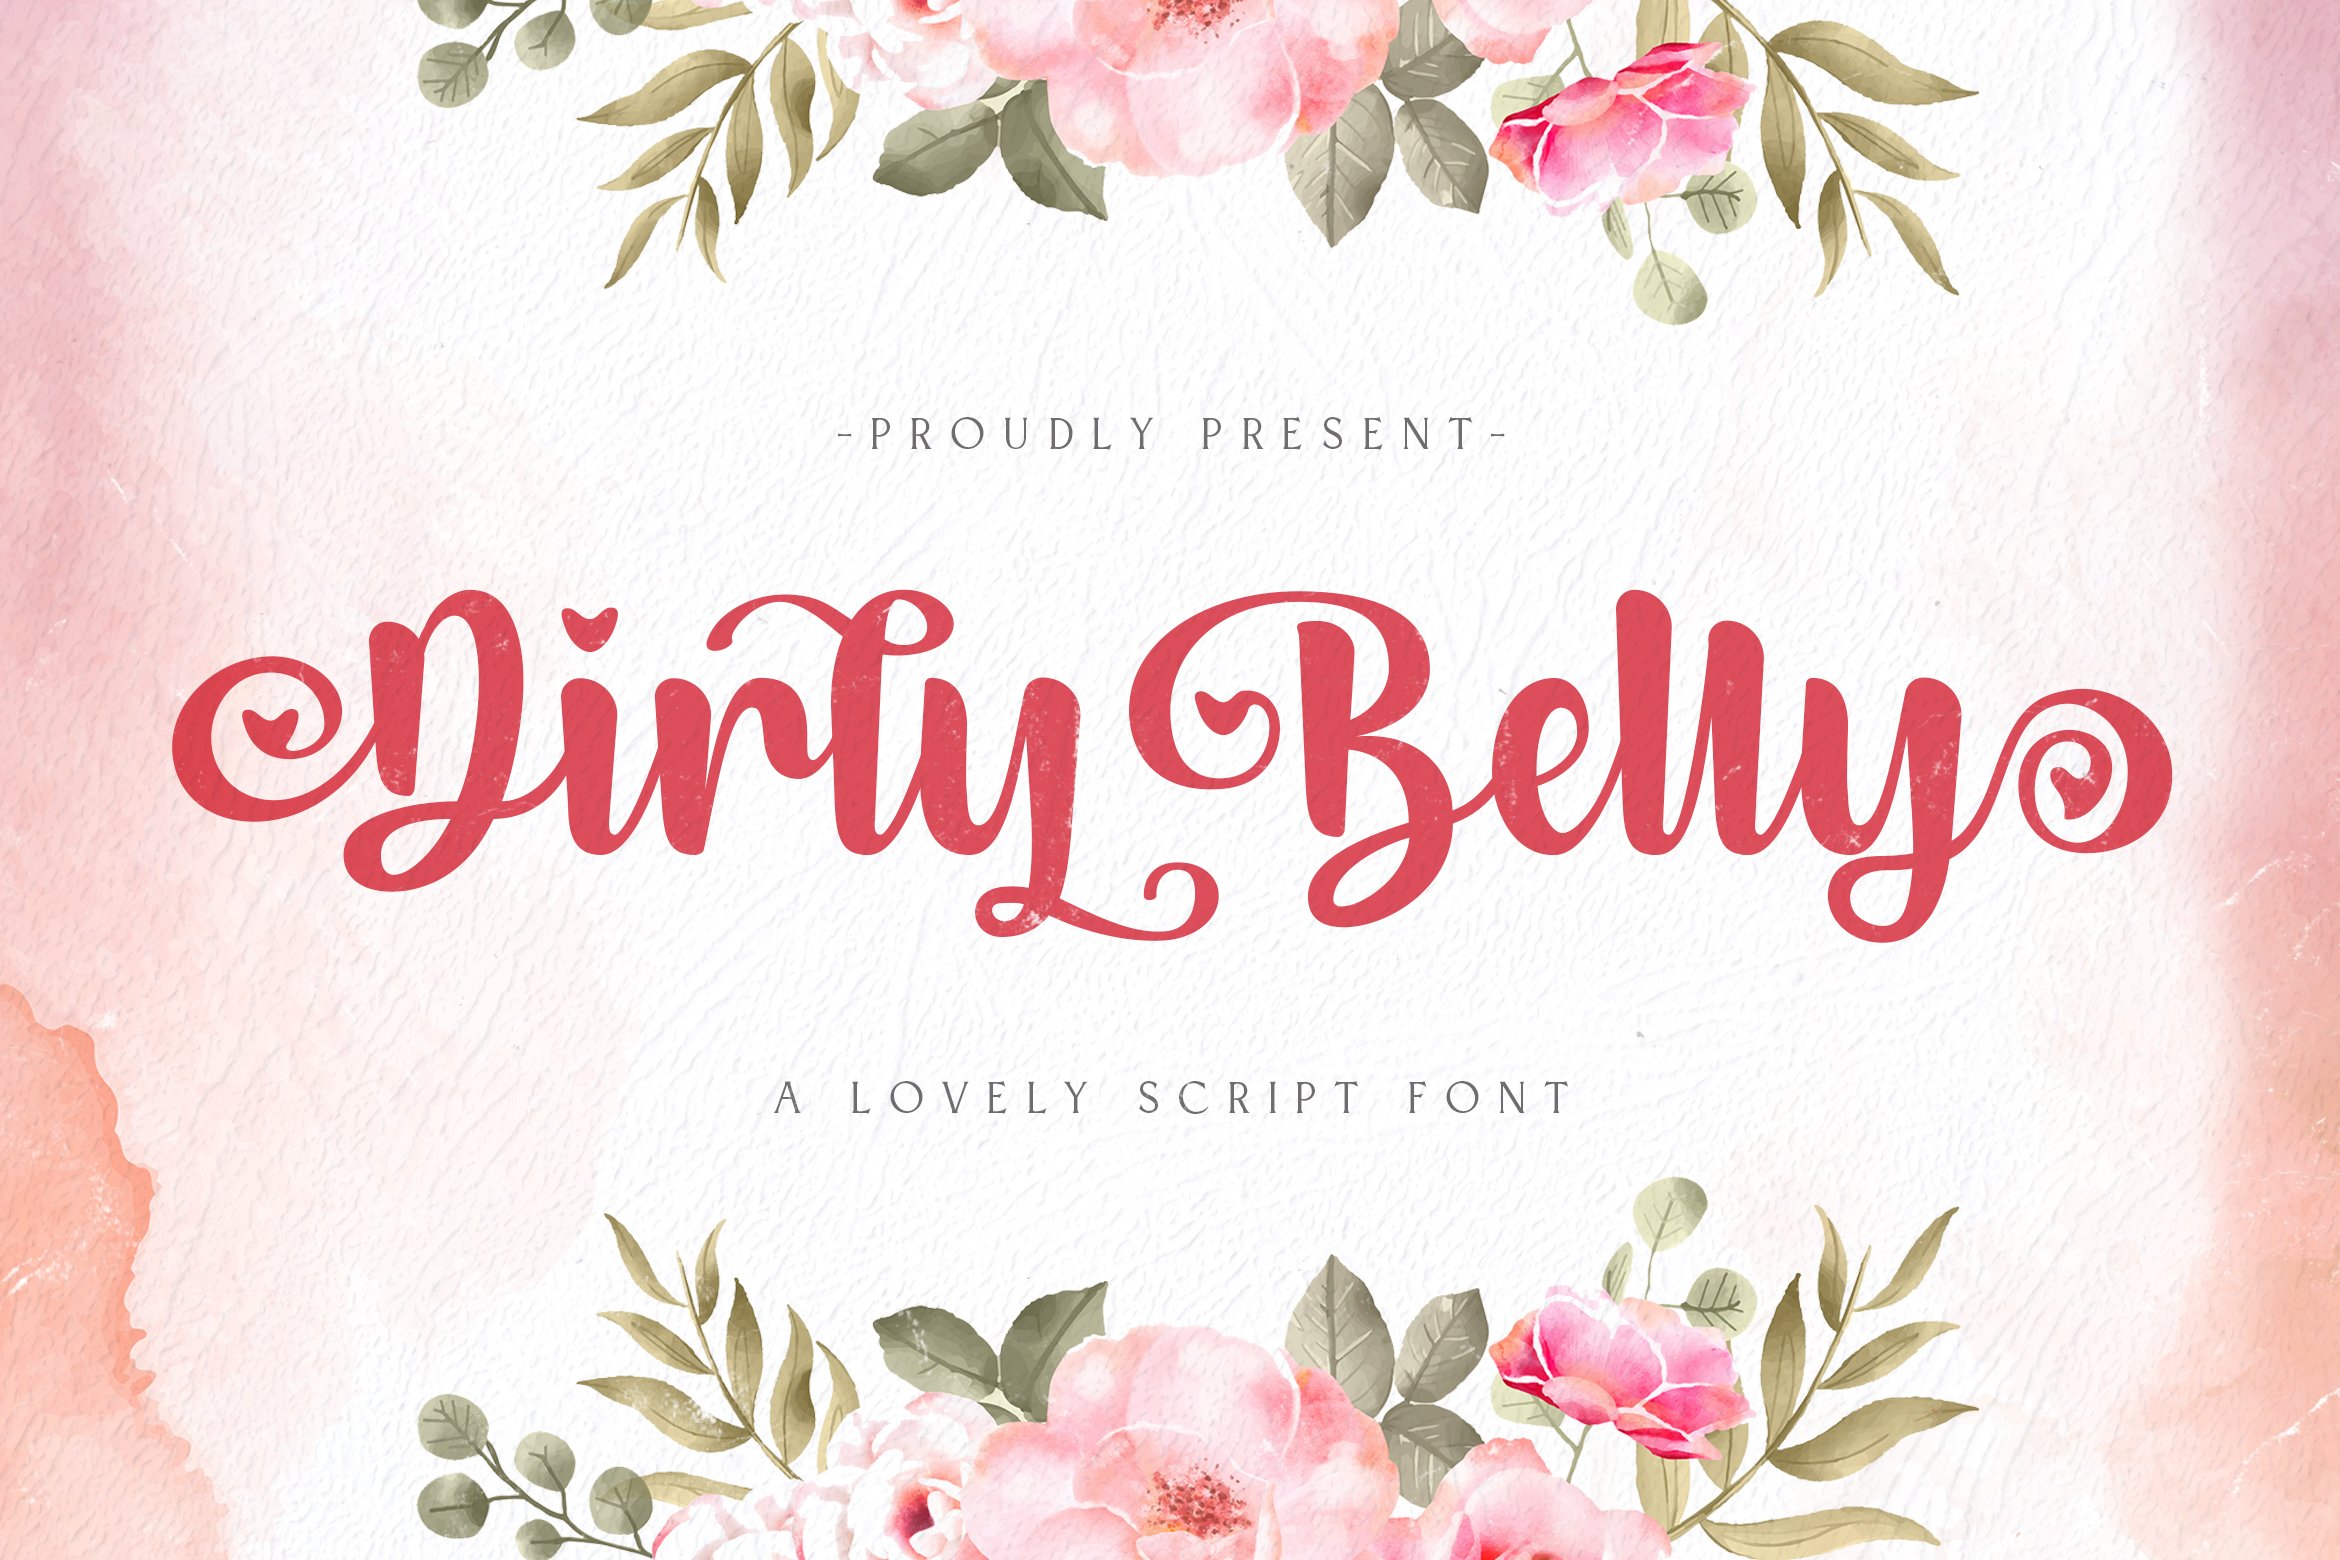 Dirly Belly - Calligraphy Font cover image.